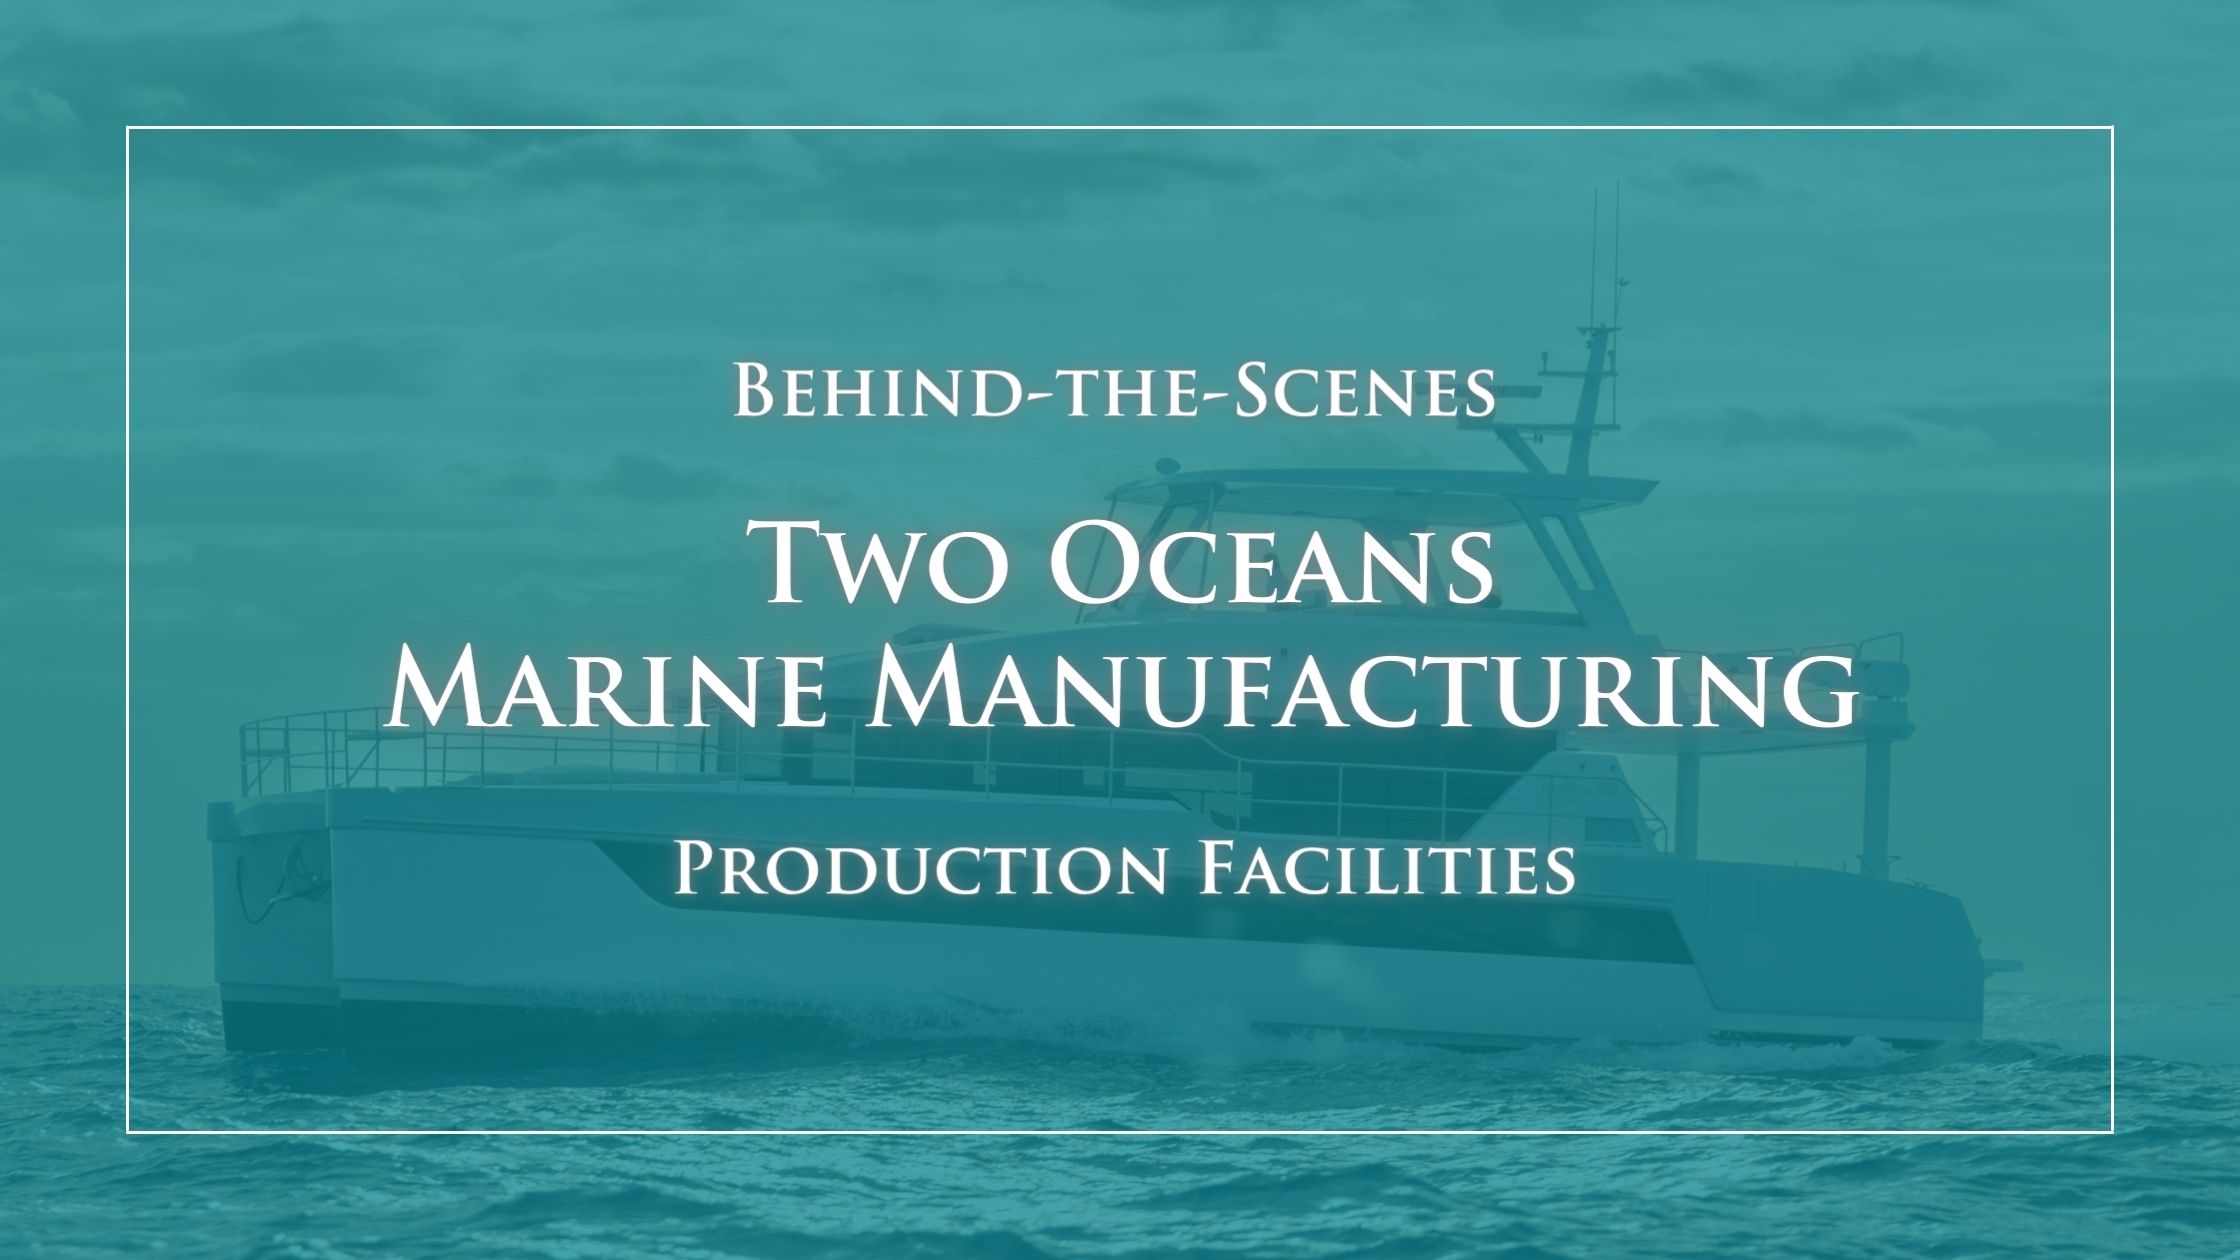 A Behind-the-Scenes Look at Two Oceans Marine Manufacturing’s Production Facilities in Cape Town, South Africa